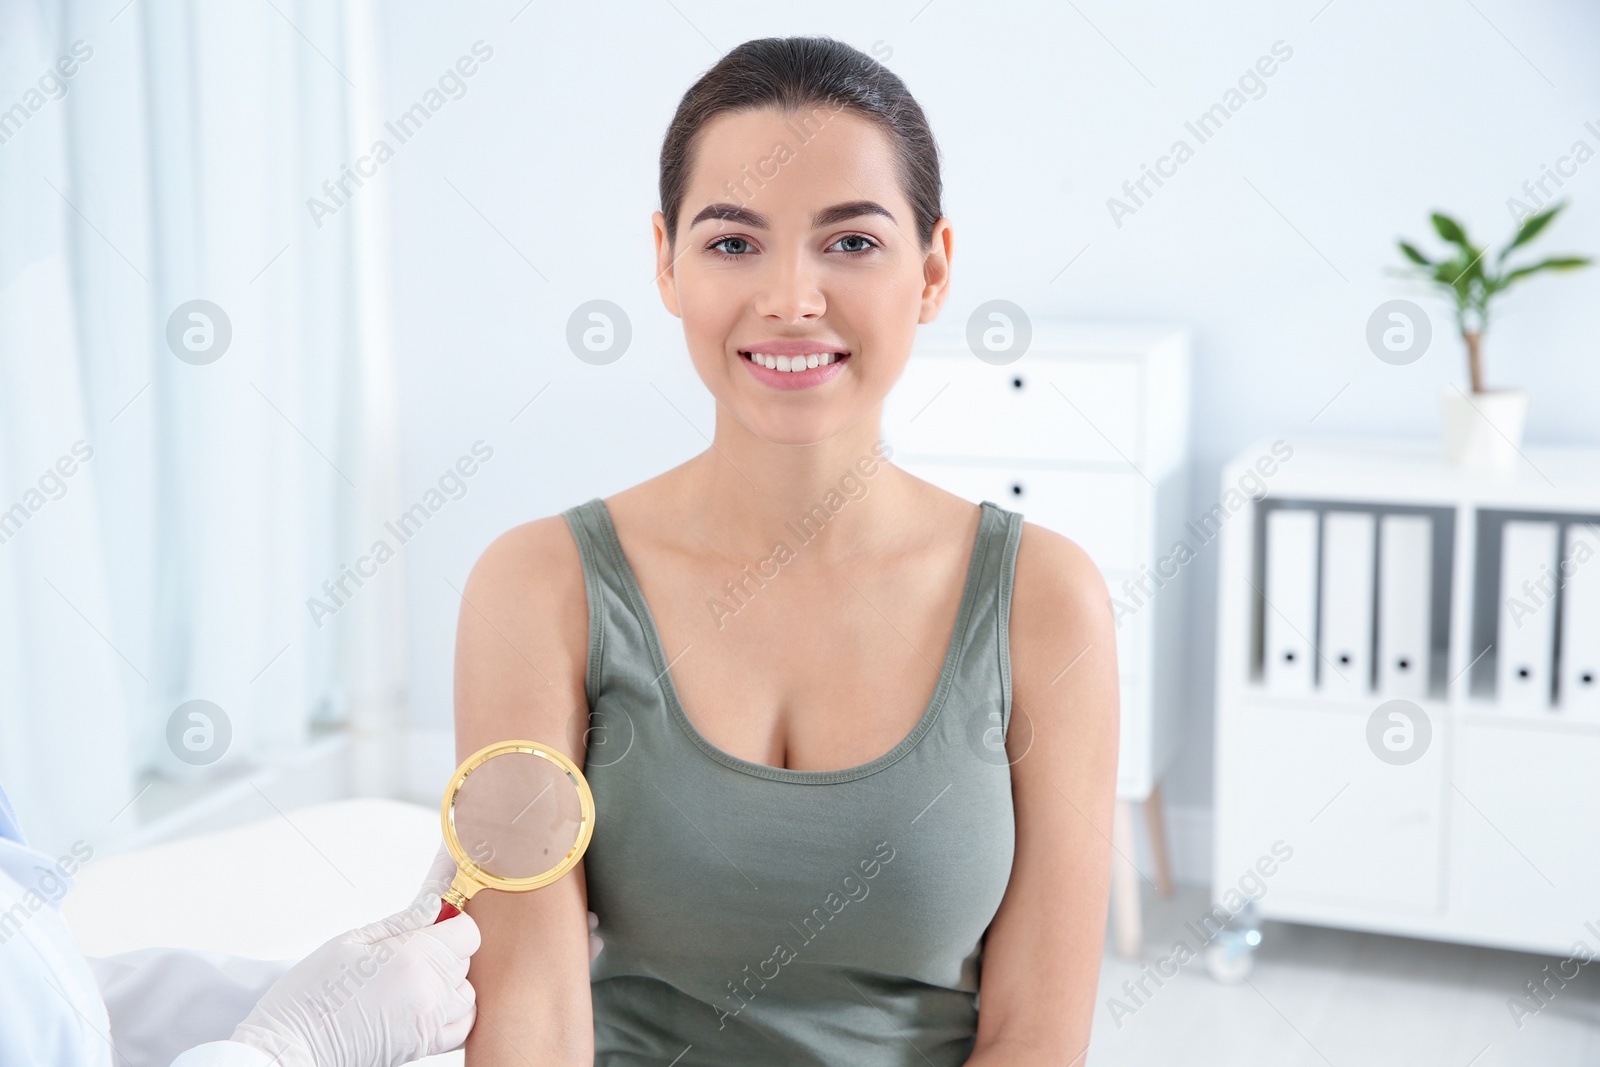 Photo of Dermatologist examining patient's birthmark with magnifying glass in clinic